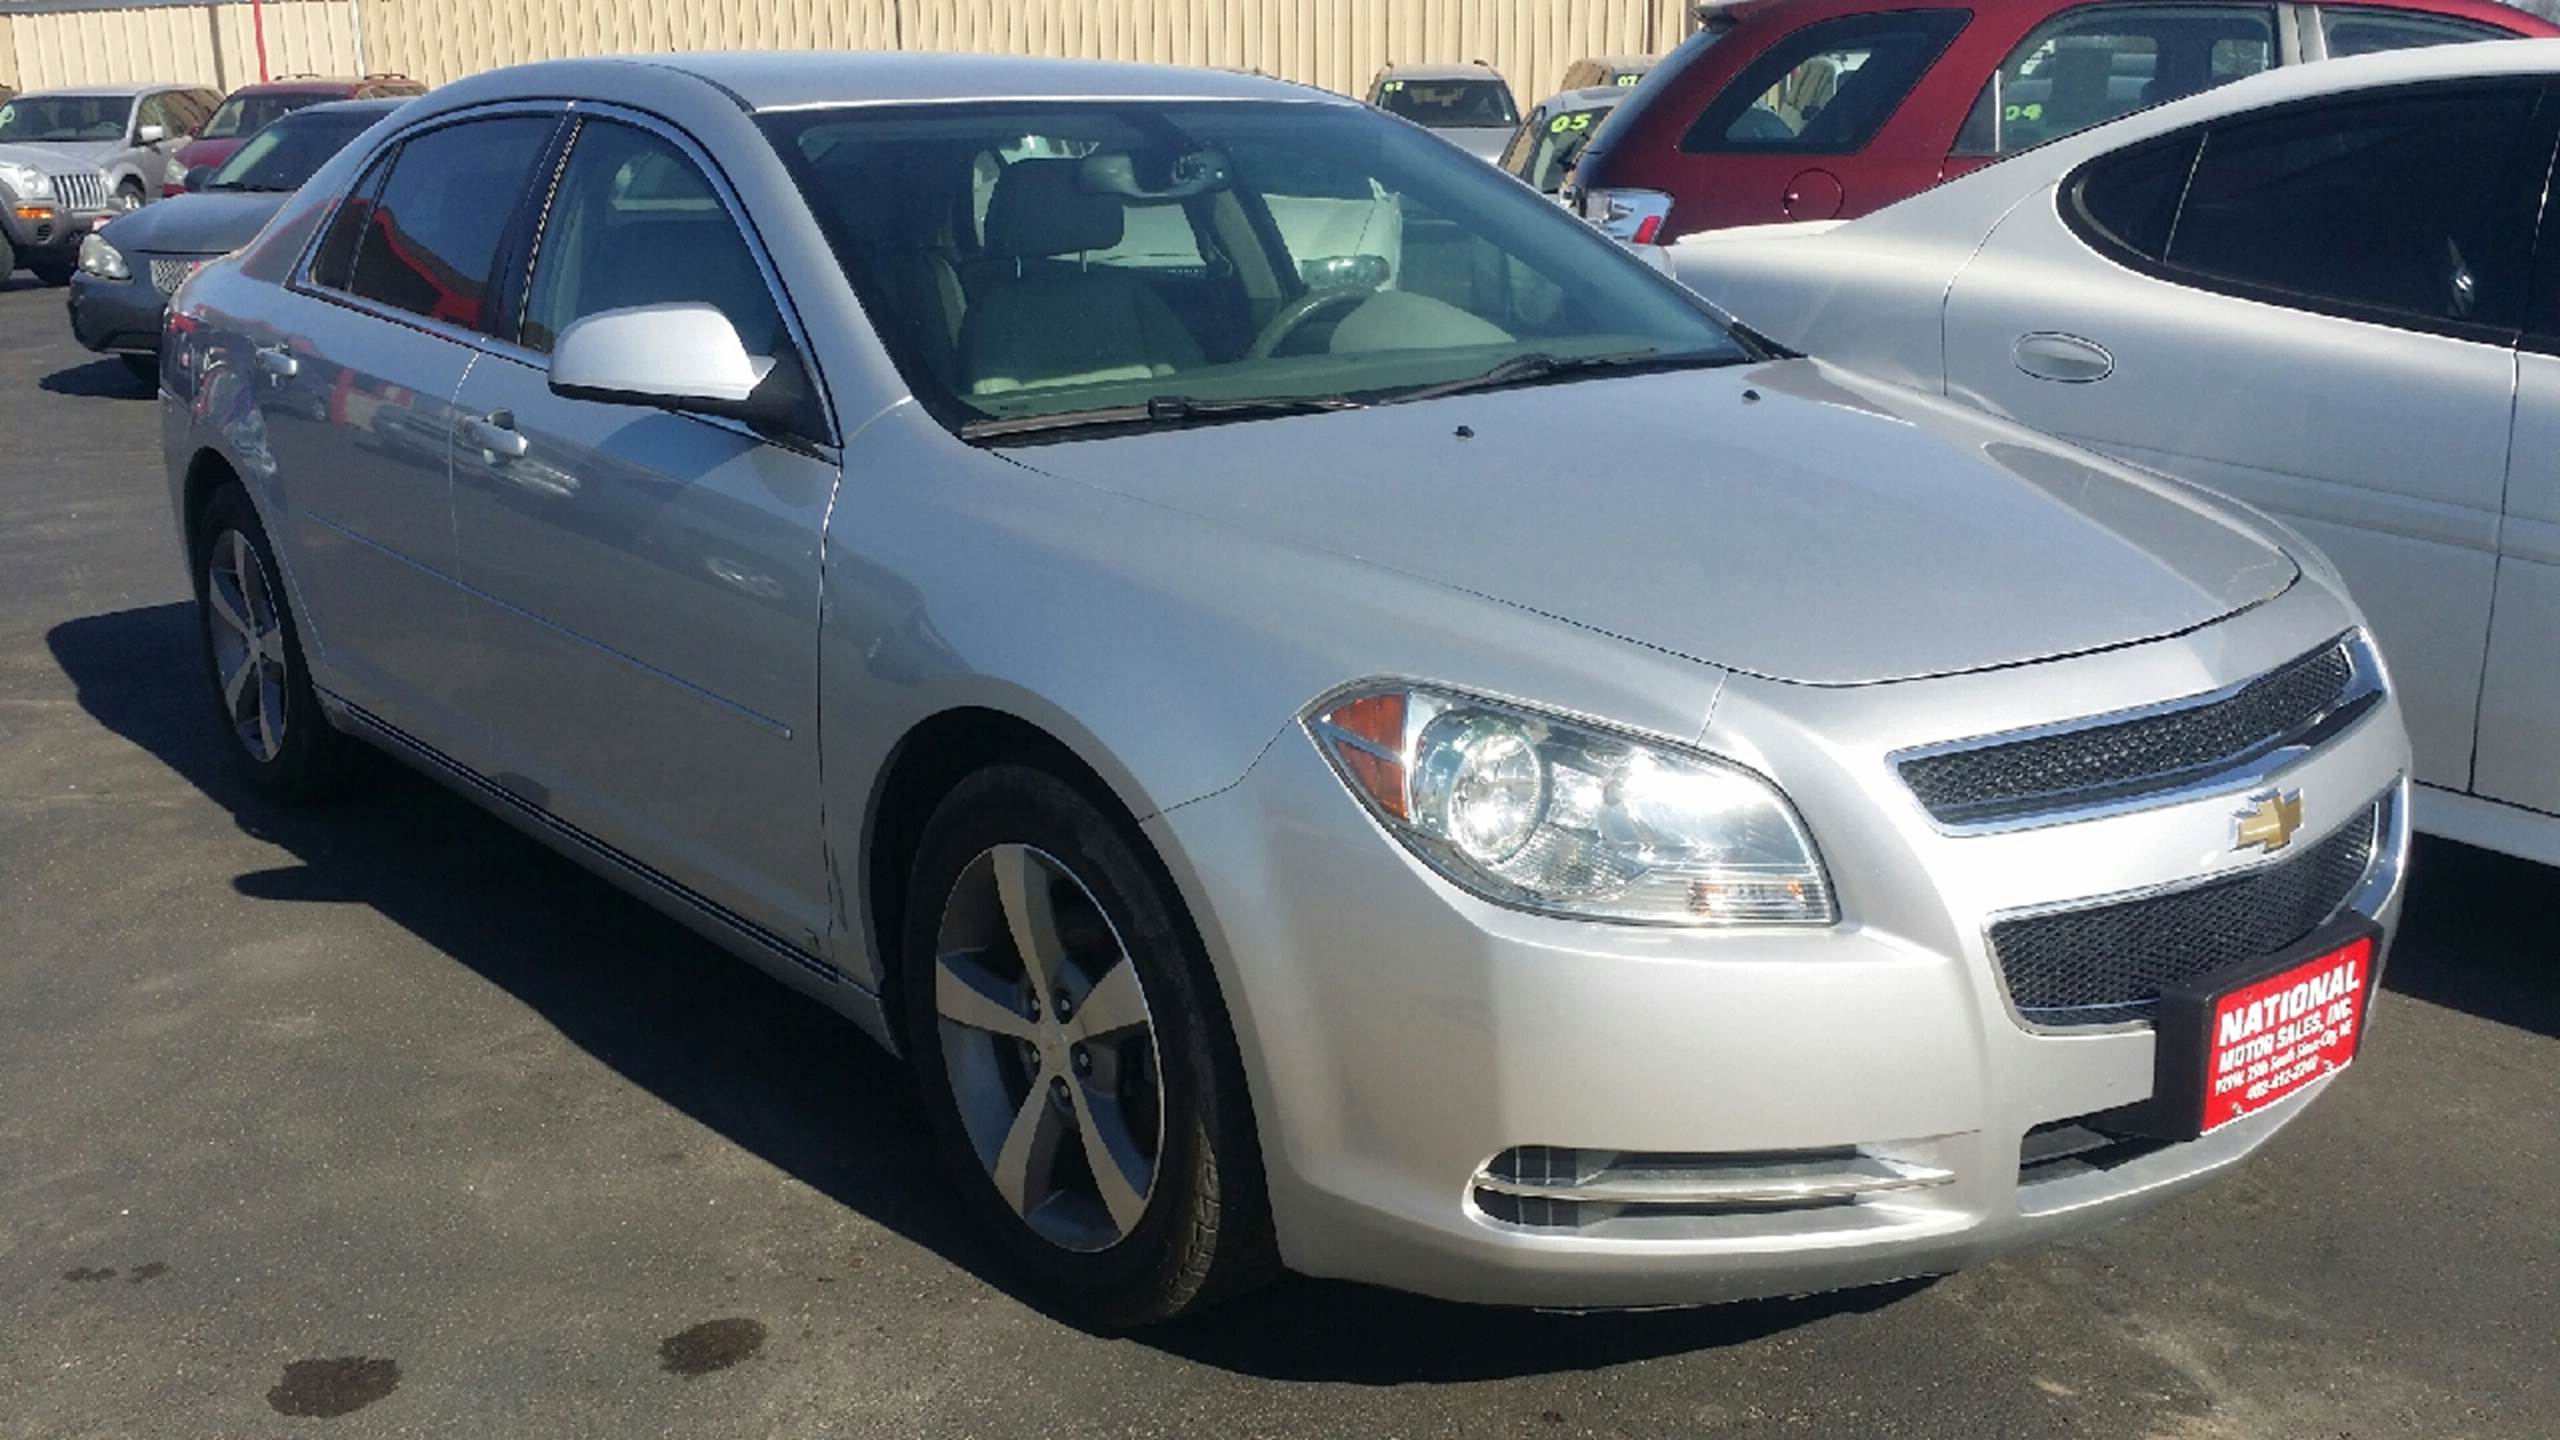 2009 Chevrolet Malibu for sale at National Motor Sales Inc in South Sioux City NE